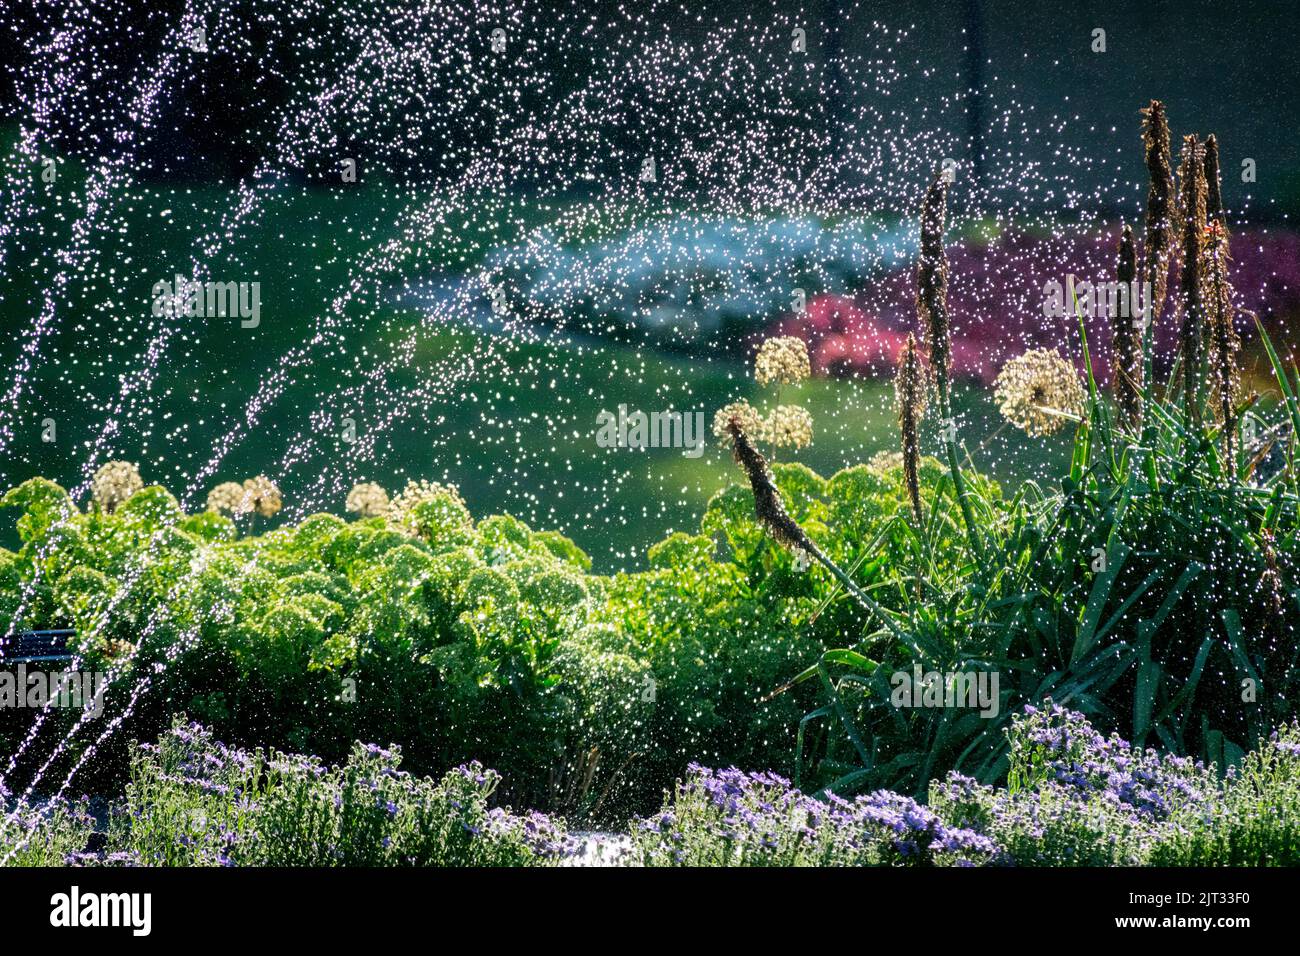 Watering garden flower bed in summer, Water falls on flowers August Stock Photo